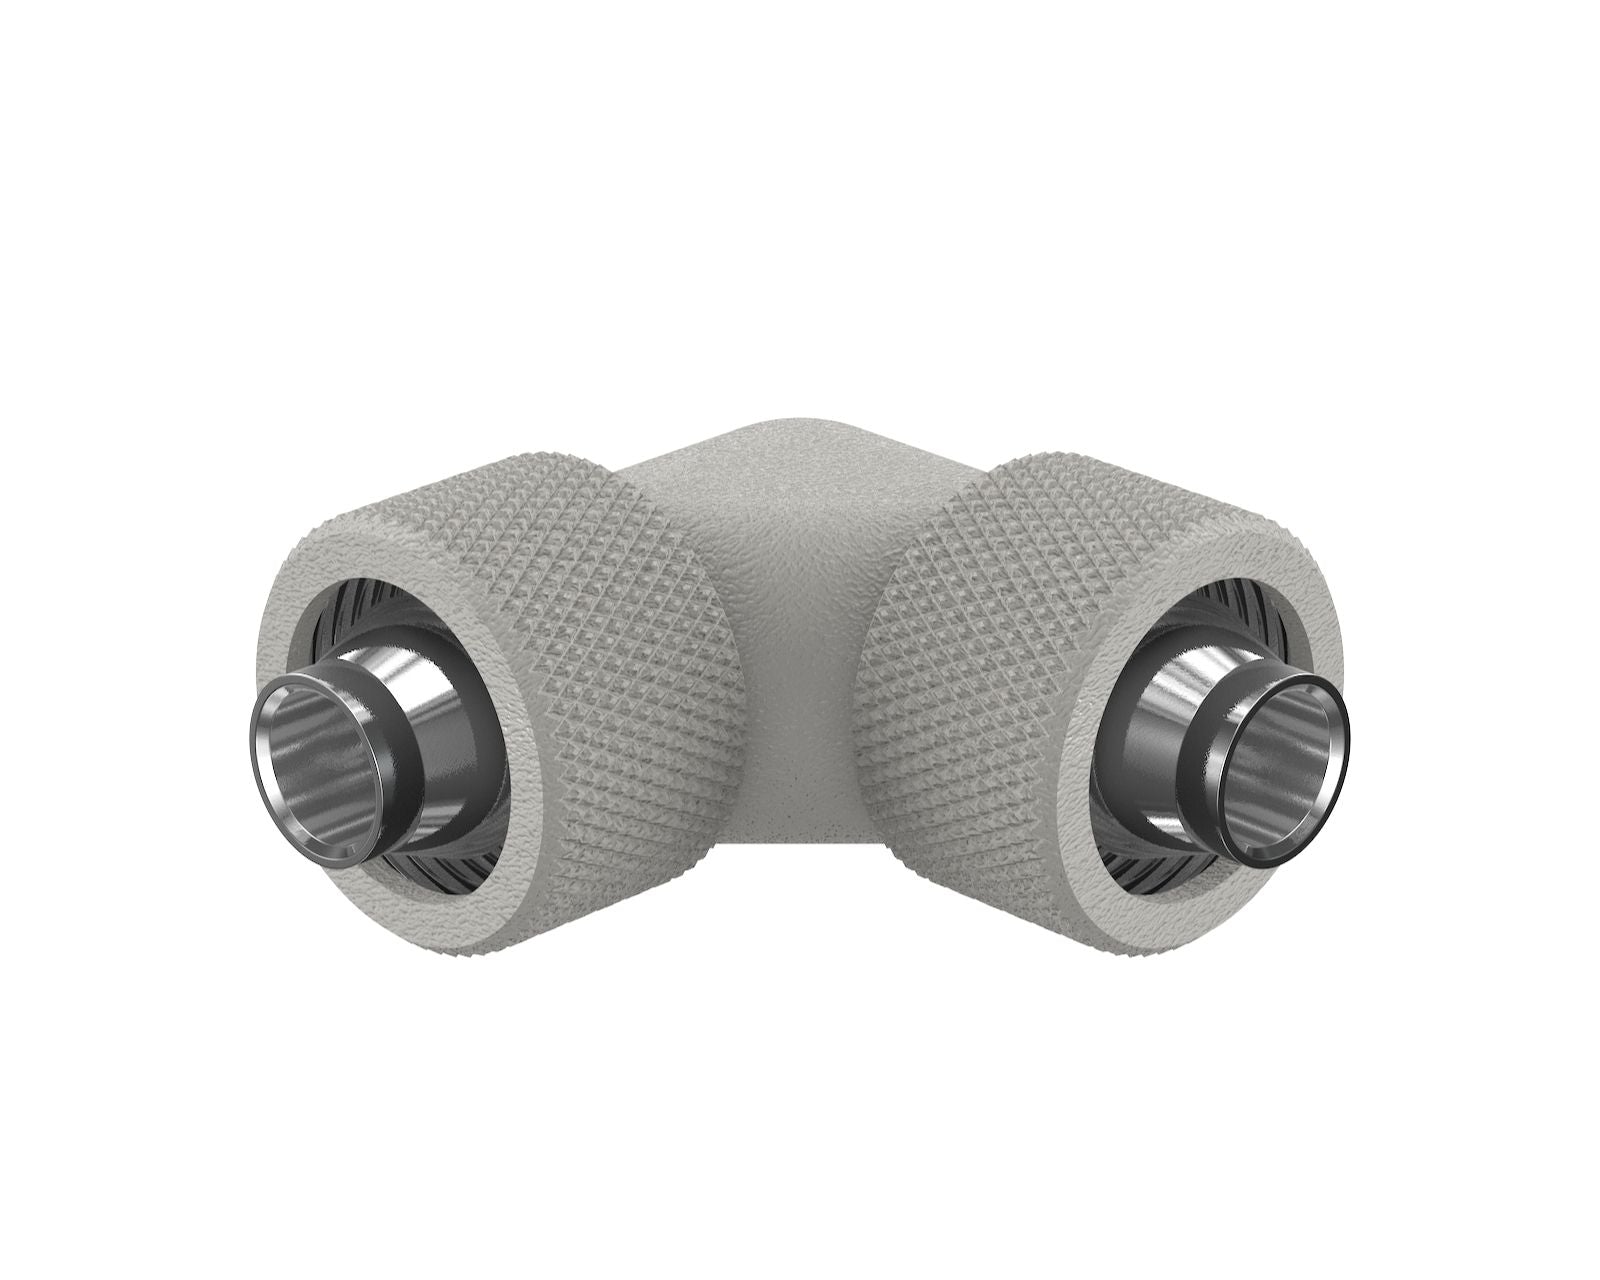 PrimoChill SecureFit SX - Premium 90 Degree Compression Fitting Set For 7/16in ID x 5/8in OD Flexible Tubing (F-SFSX75890) - Available in 20+ Colors, Custom Watercooling Loop Ready - TX Matte Silver